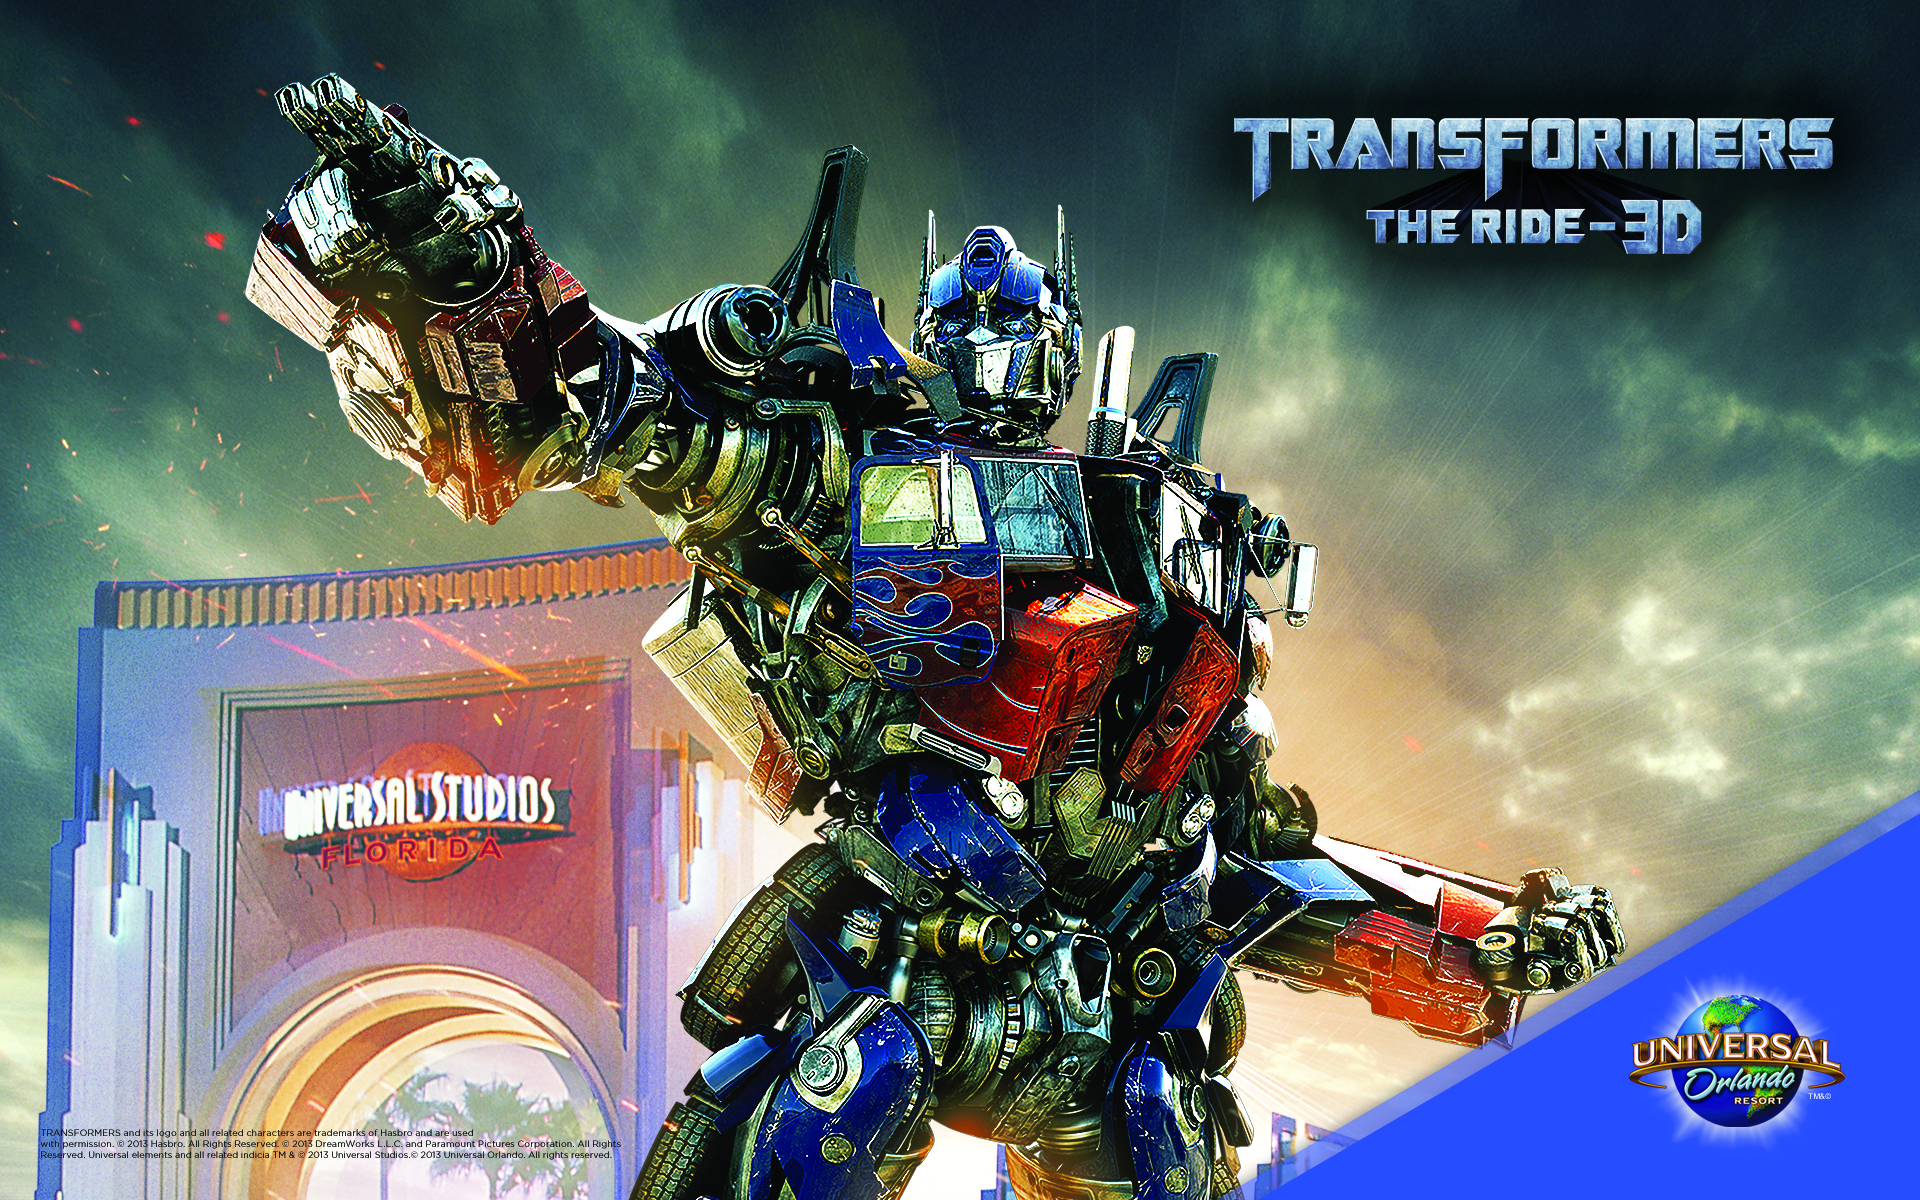 TRANSFORMERS The Ride 3D at Universal Orlando